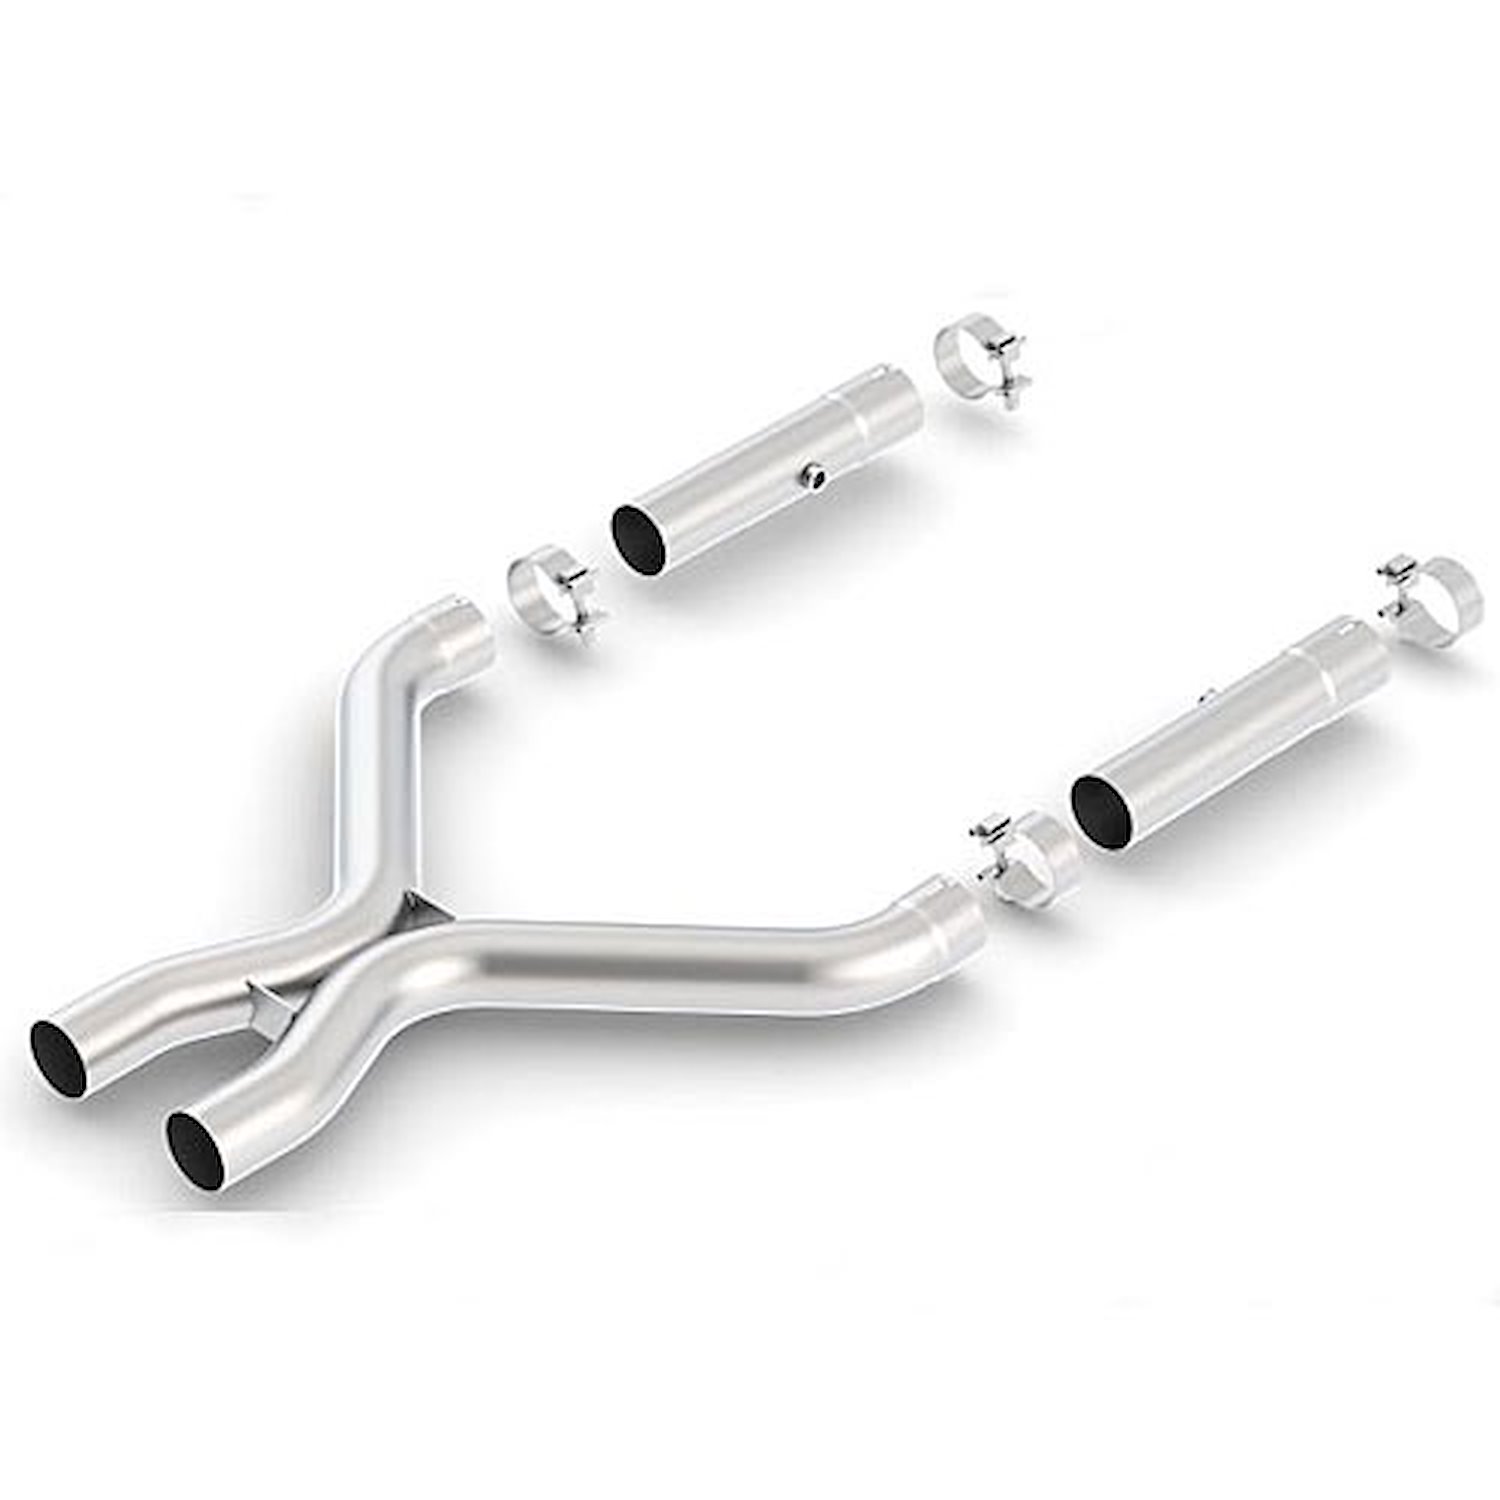 Stainless Steel X-Pipe 2013-2014 Ford Mustang Shelby GT500 5.8L